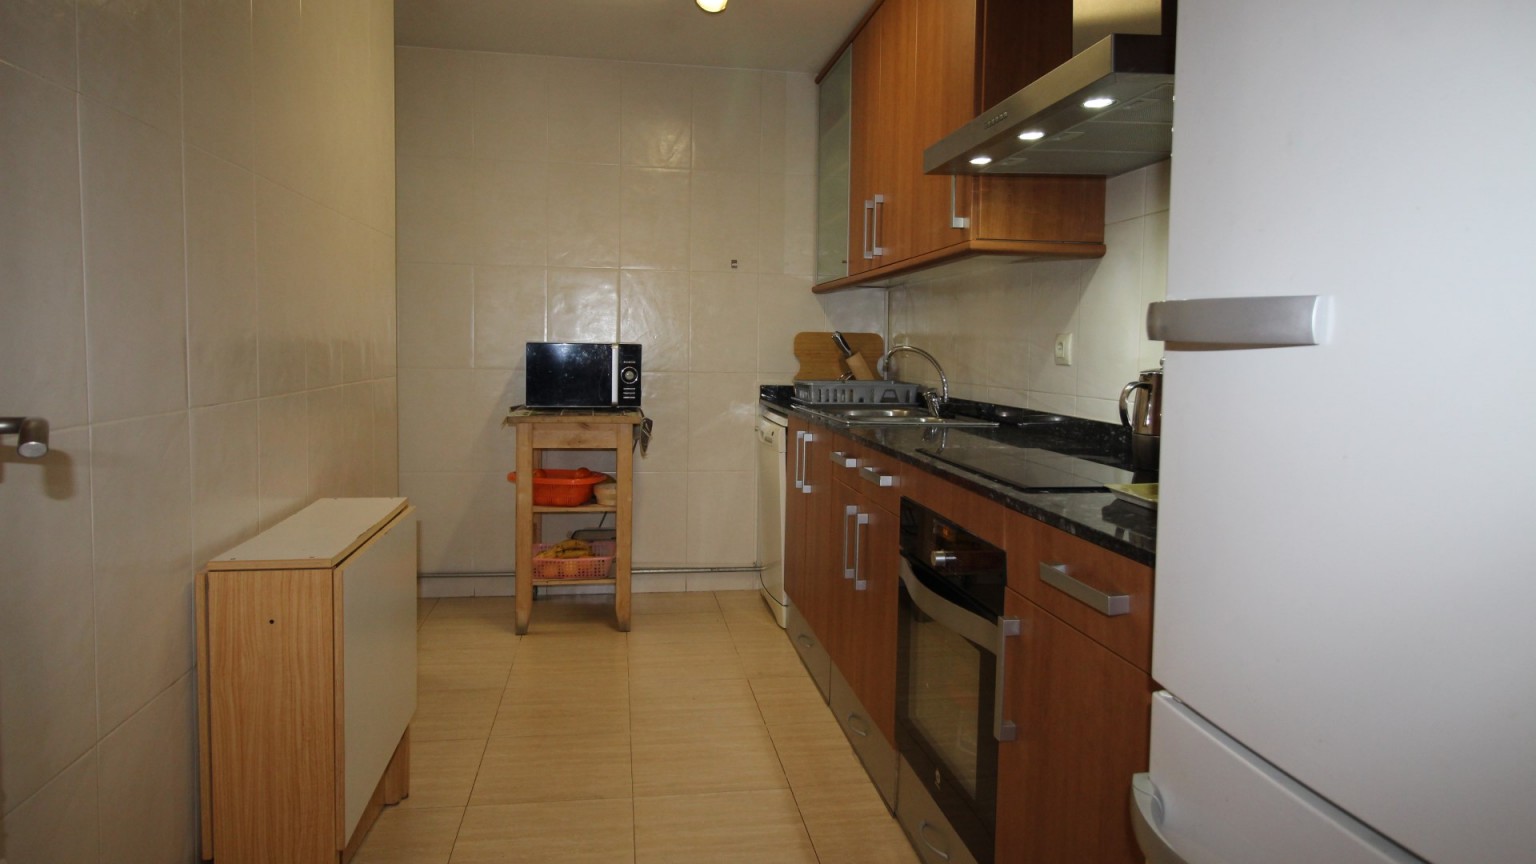 4 bedroom duplex for sale with parking included, Eixample area.